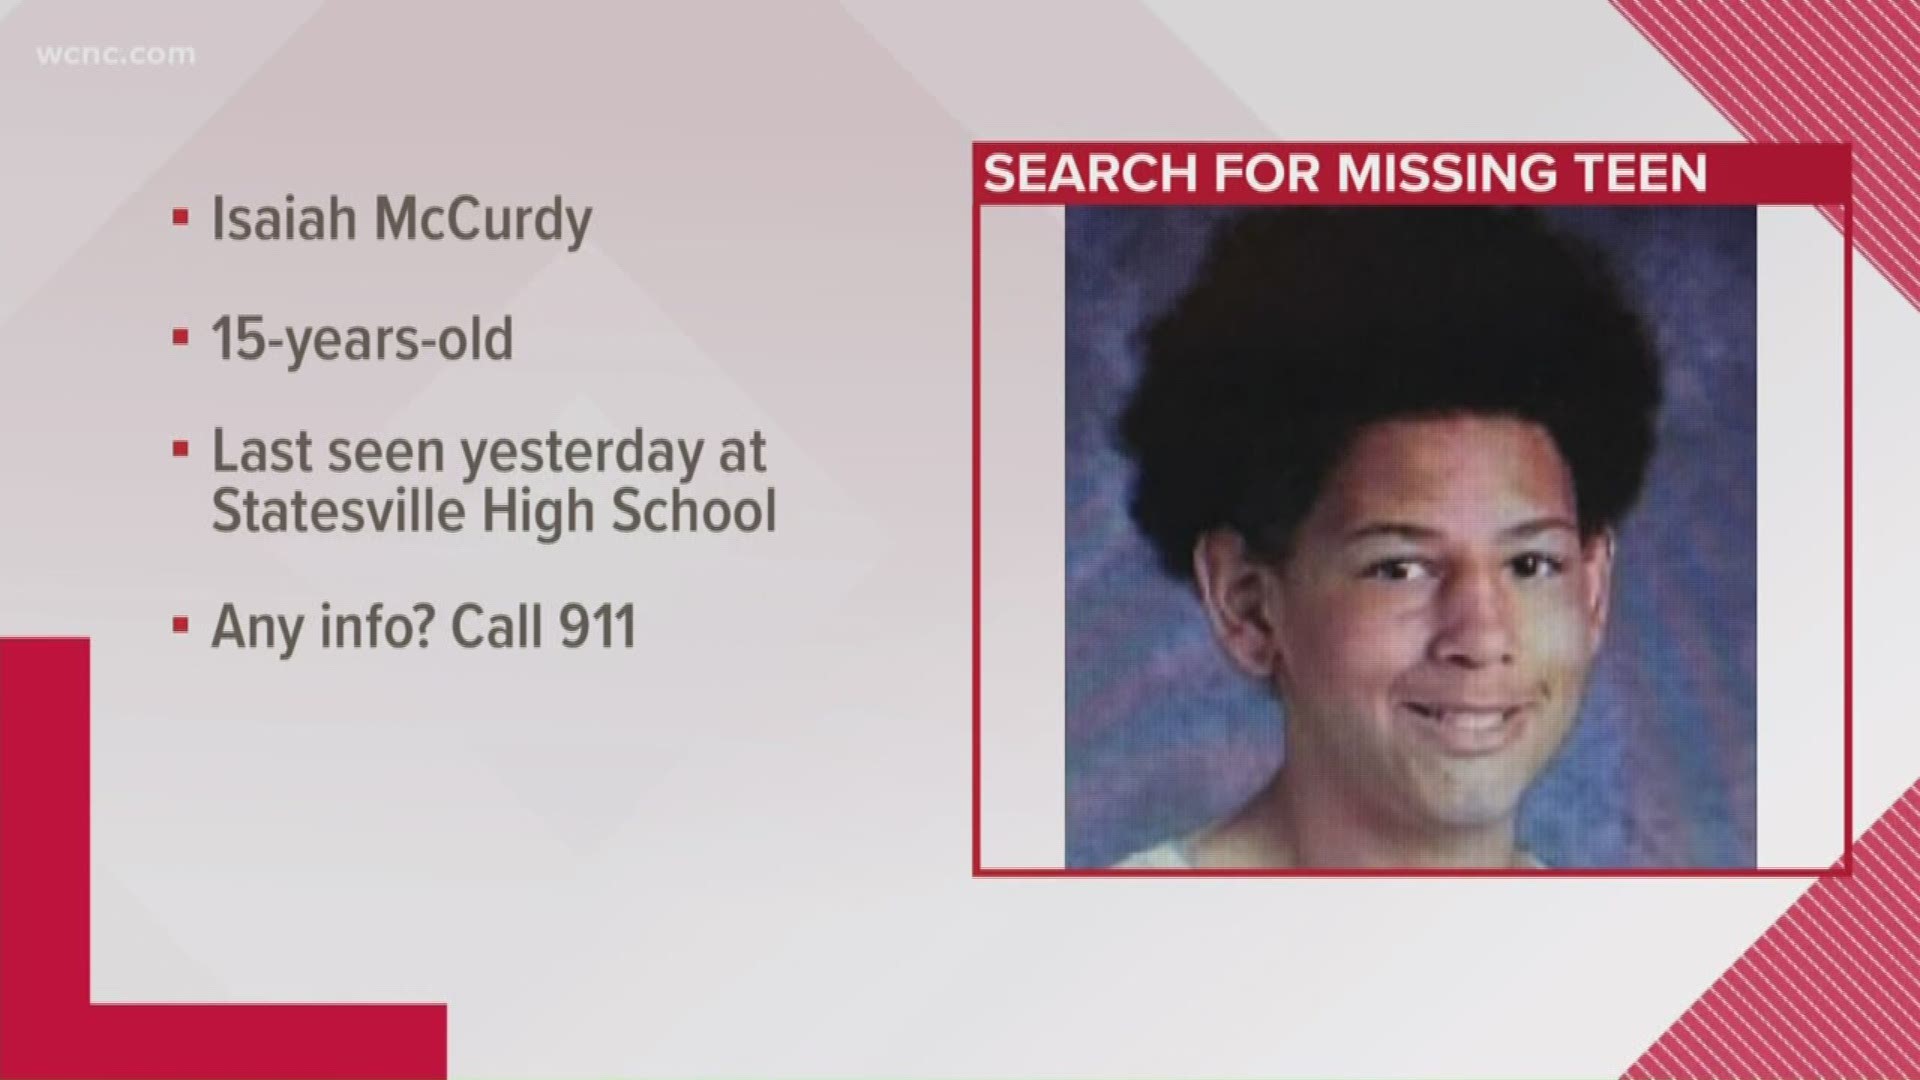 He was last seen Tuesday morning at Statesville High School wearing a blue jacket and red shoes.